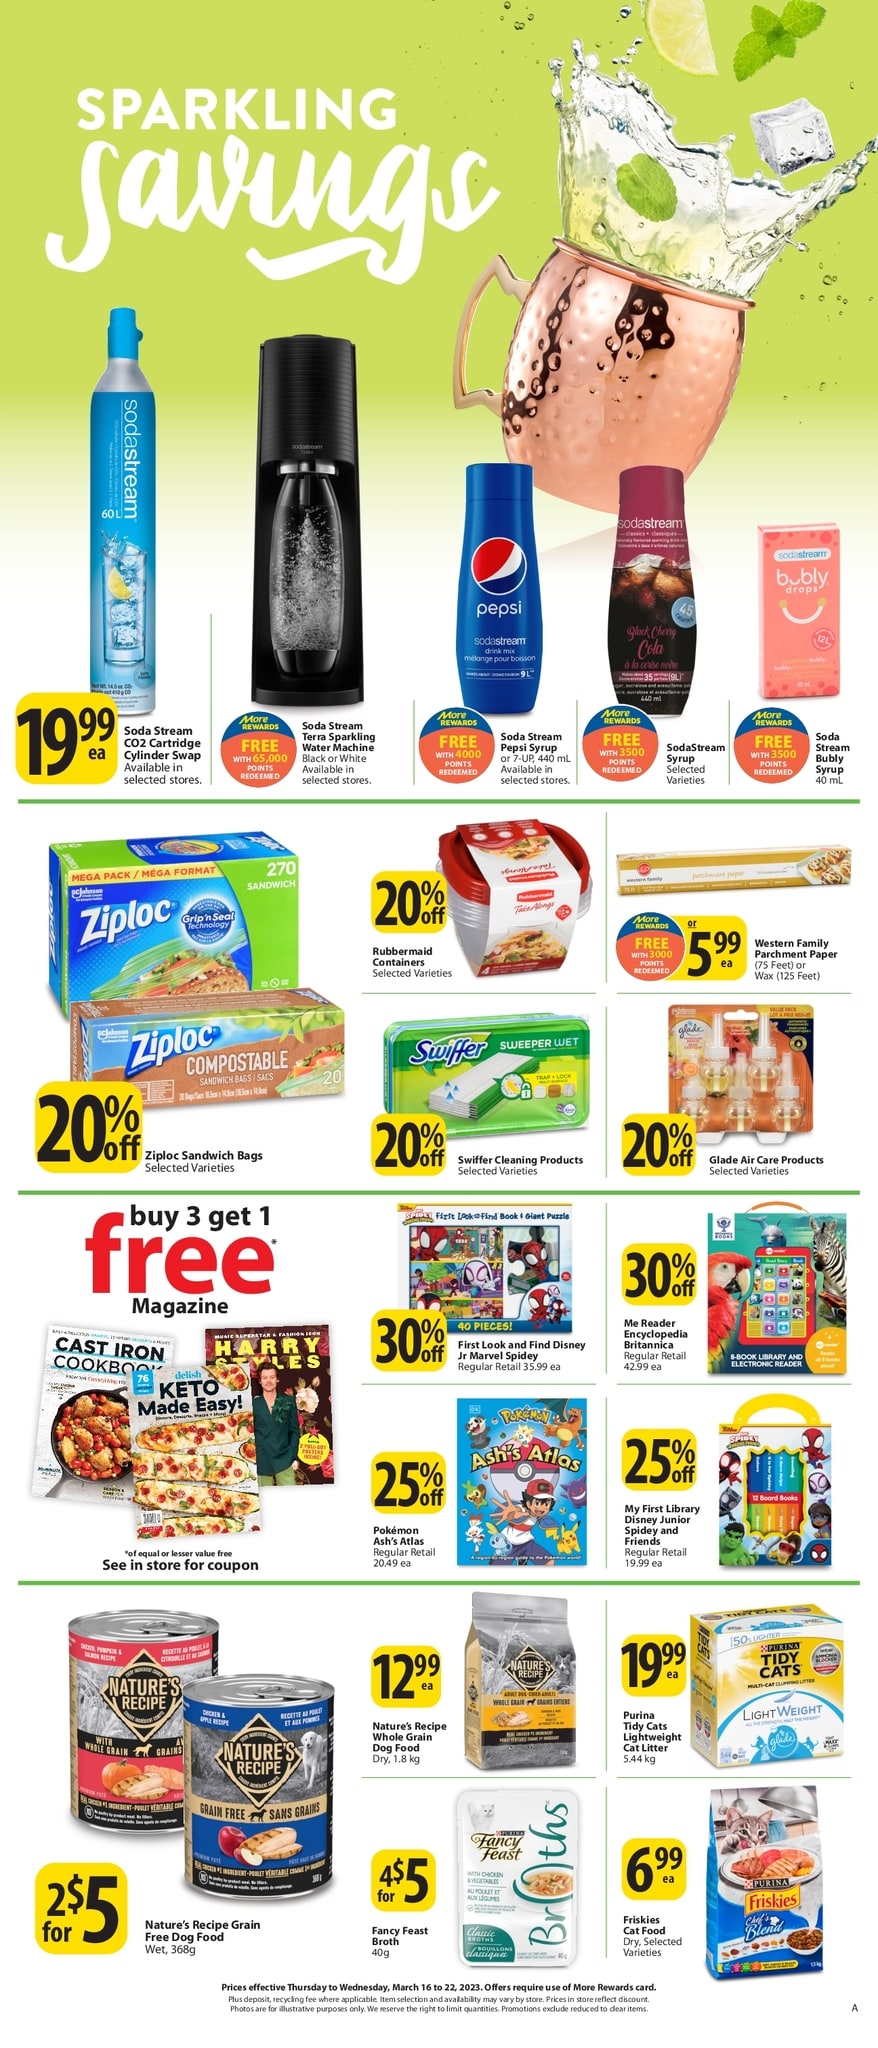 Save-On-Foods - Weekly Flyer Specials - Page 17